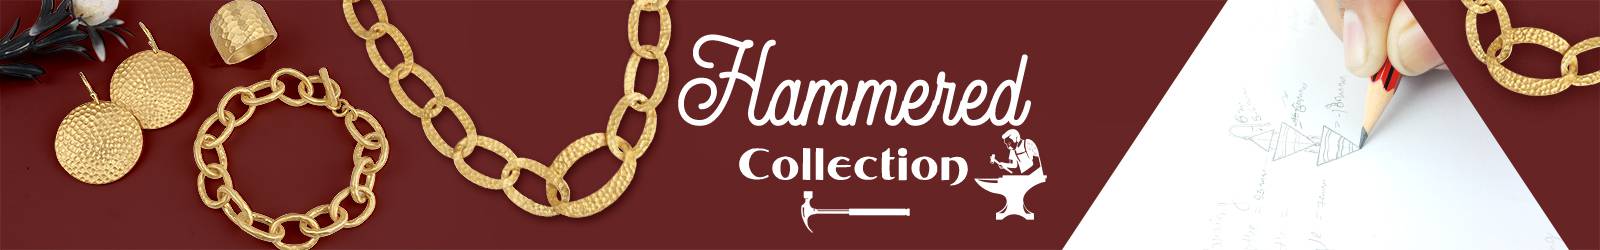 Handmade Hammered Silver Jewelry Collection Manufacturer in Jaipur